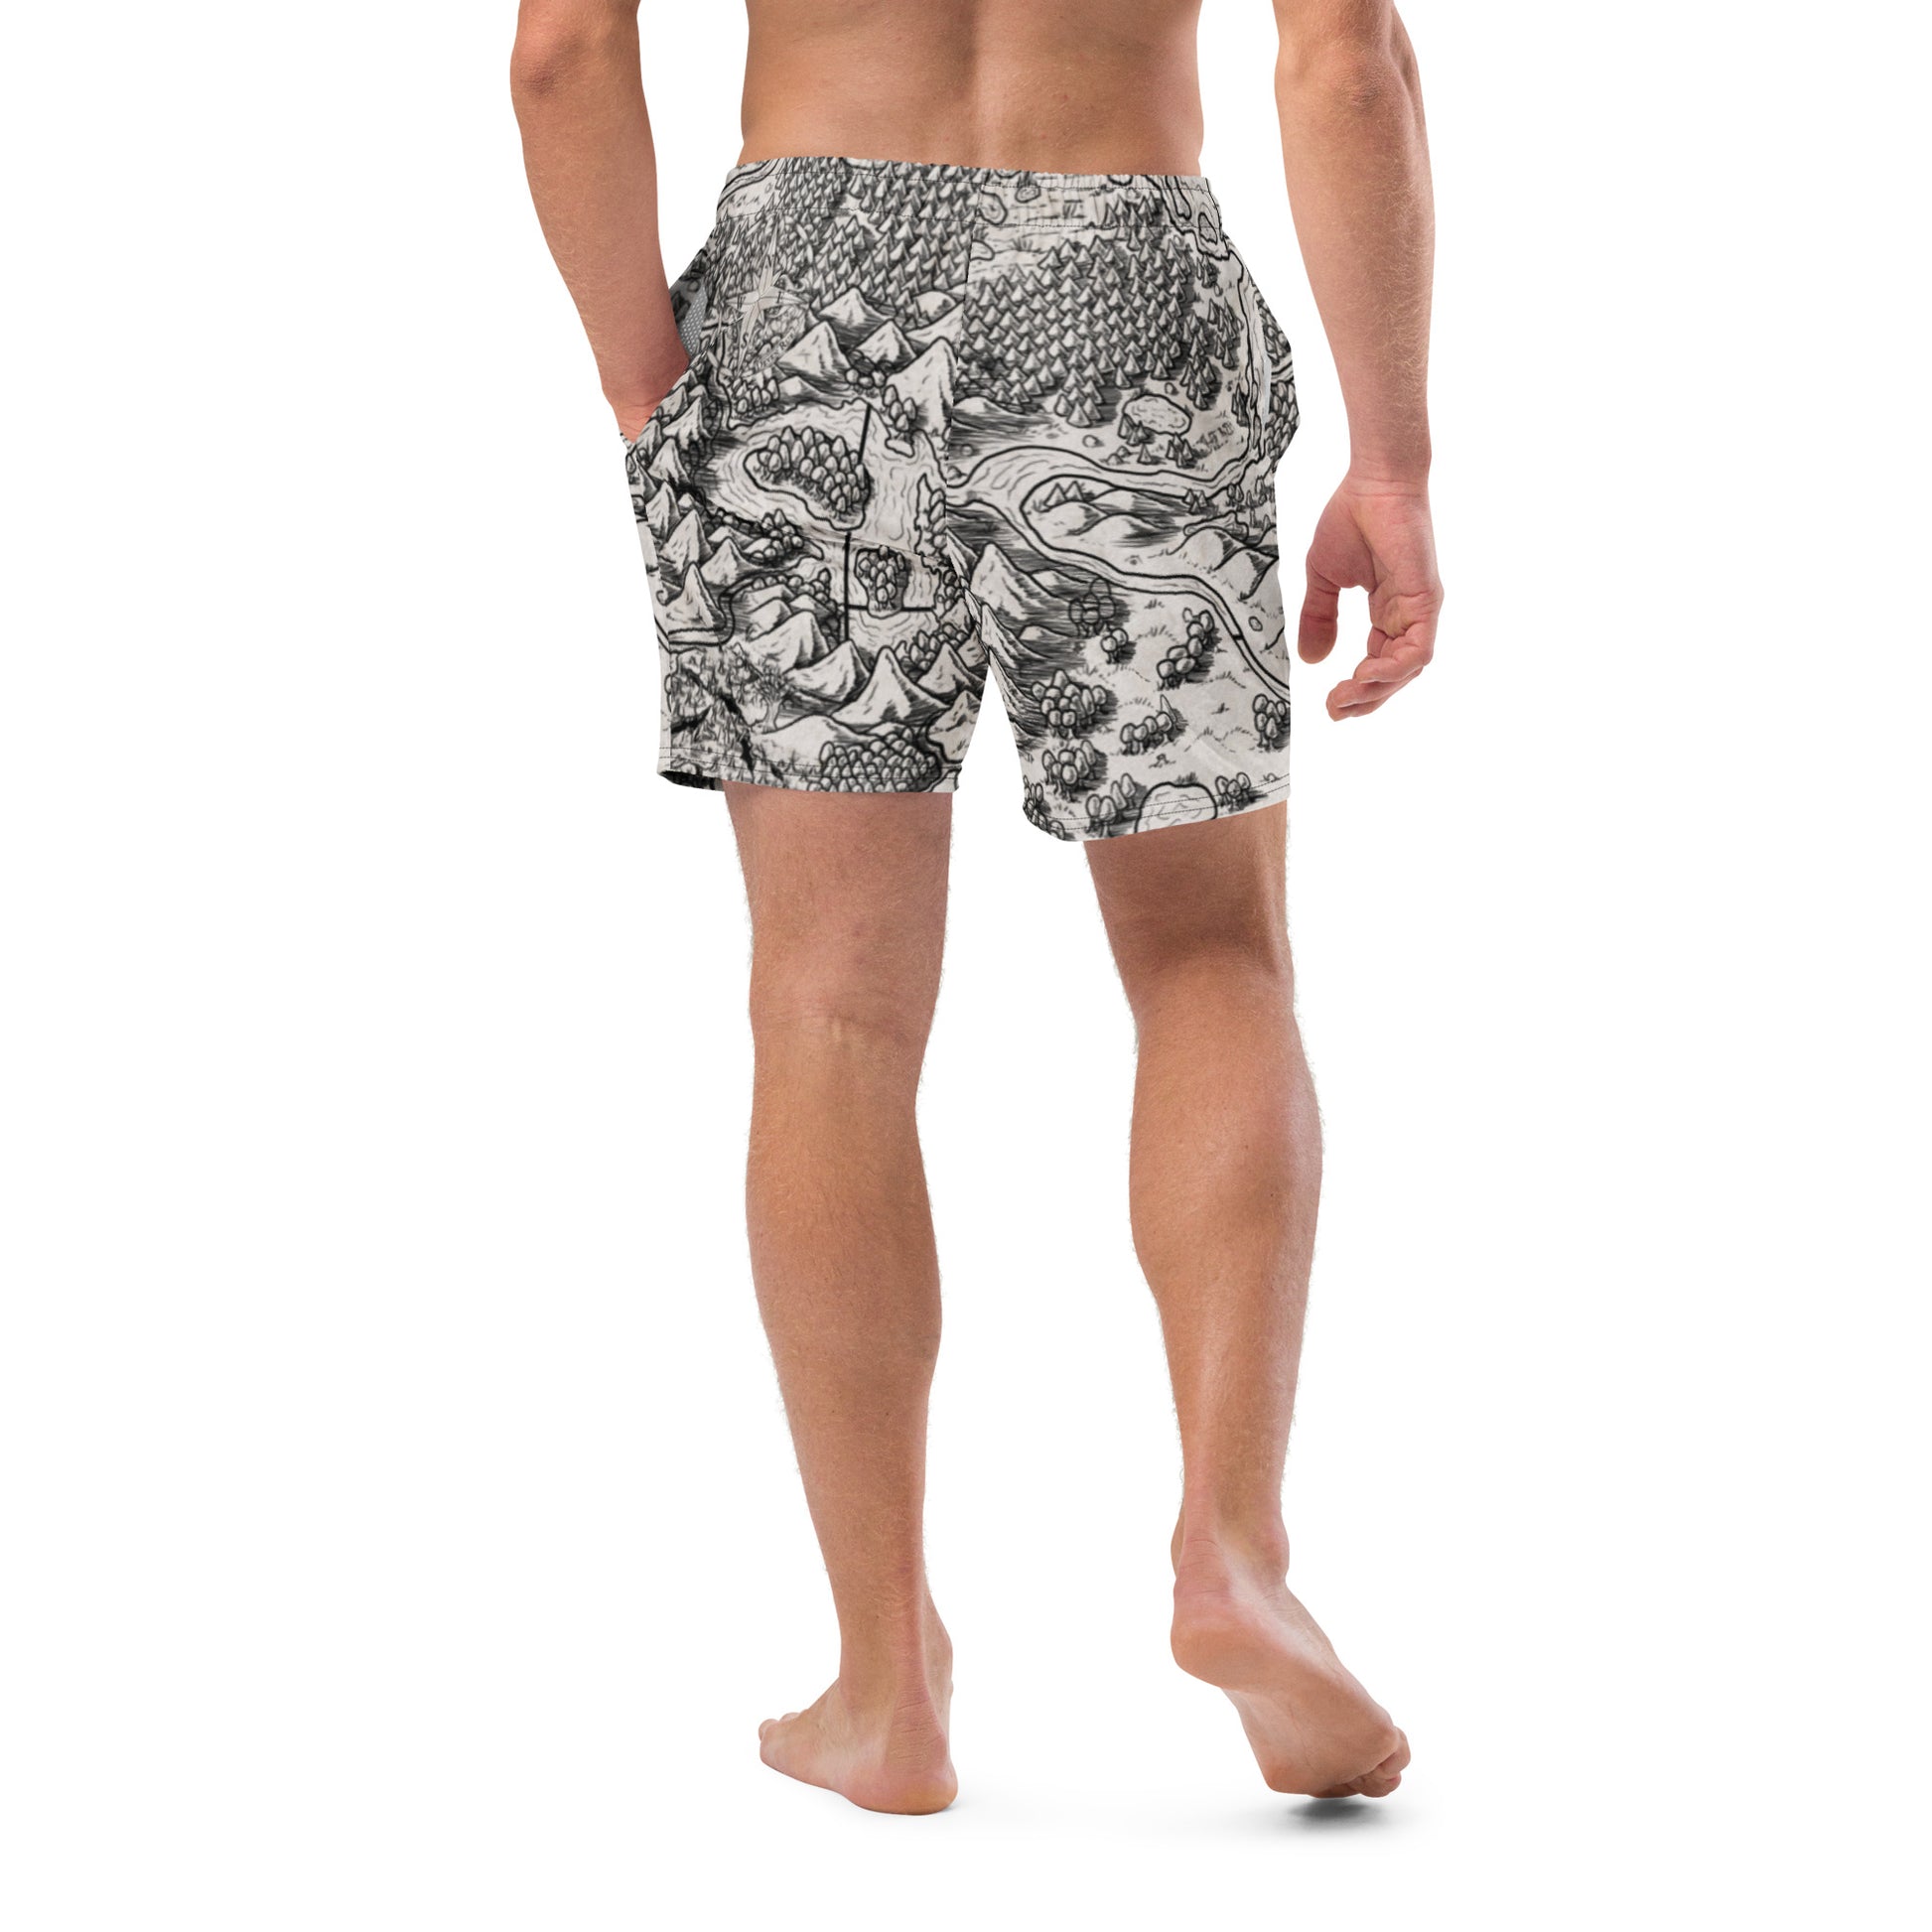 A model wears the Unexpected map swim trunks by Deven Rue, back view.